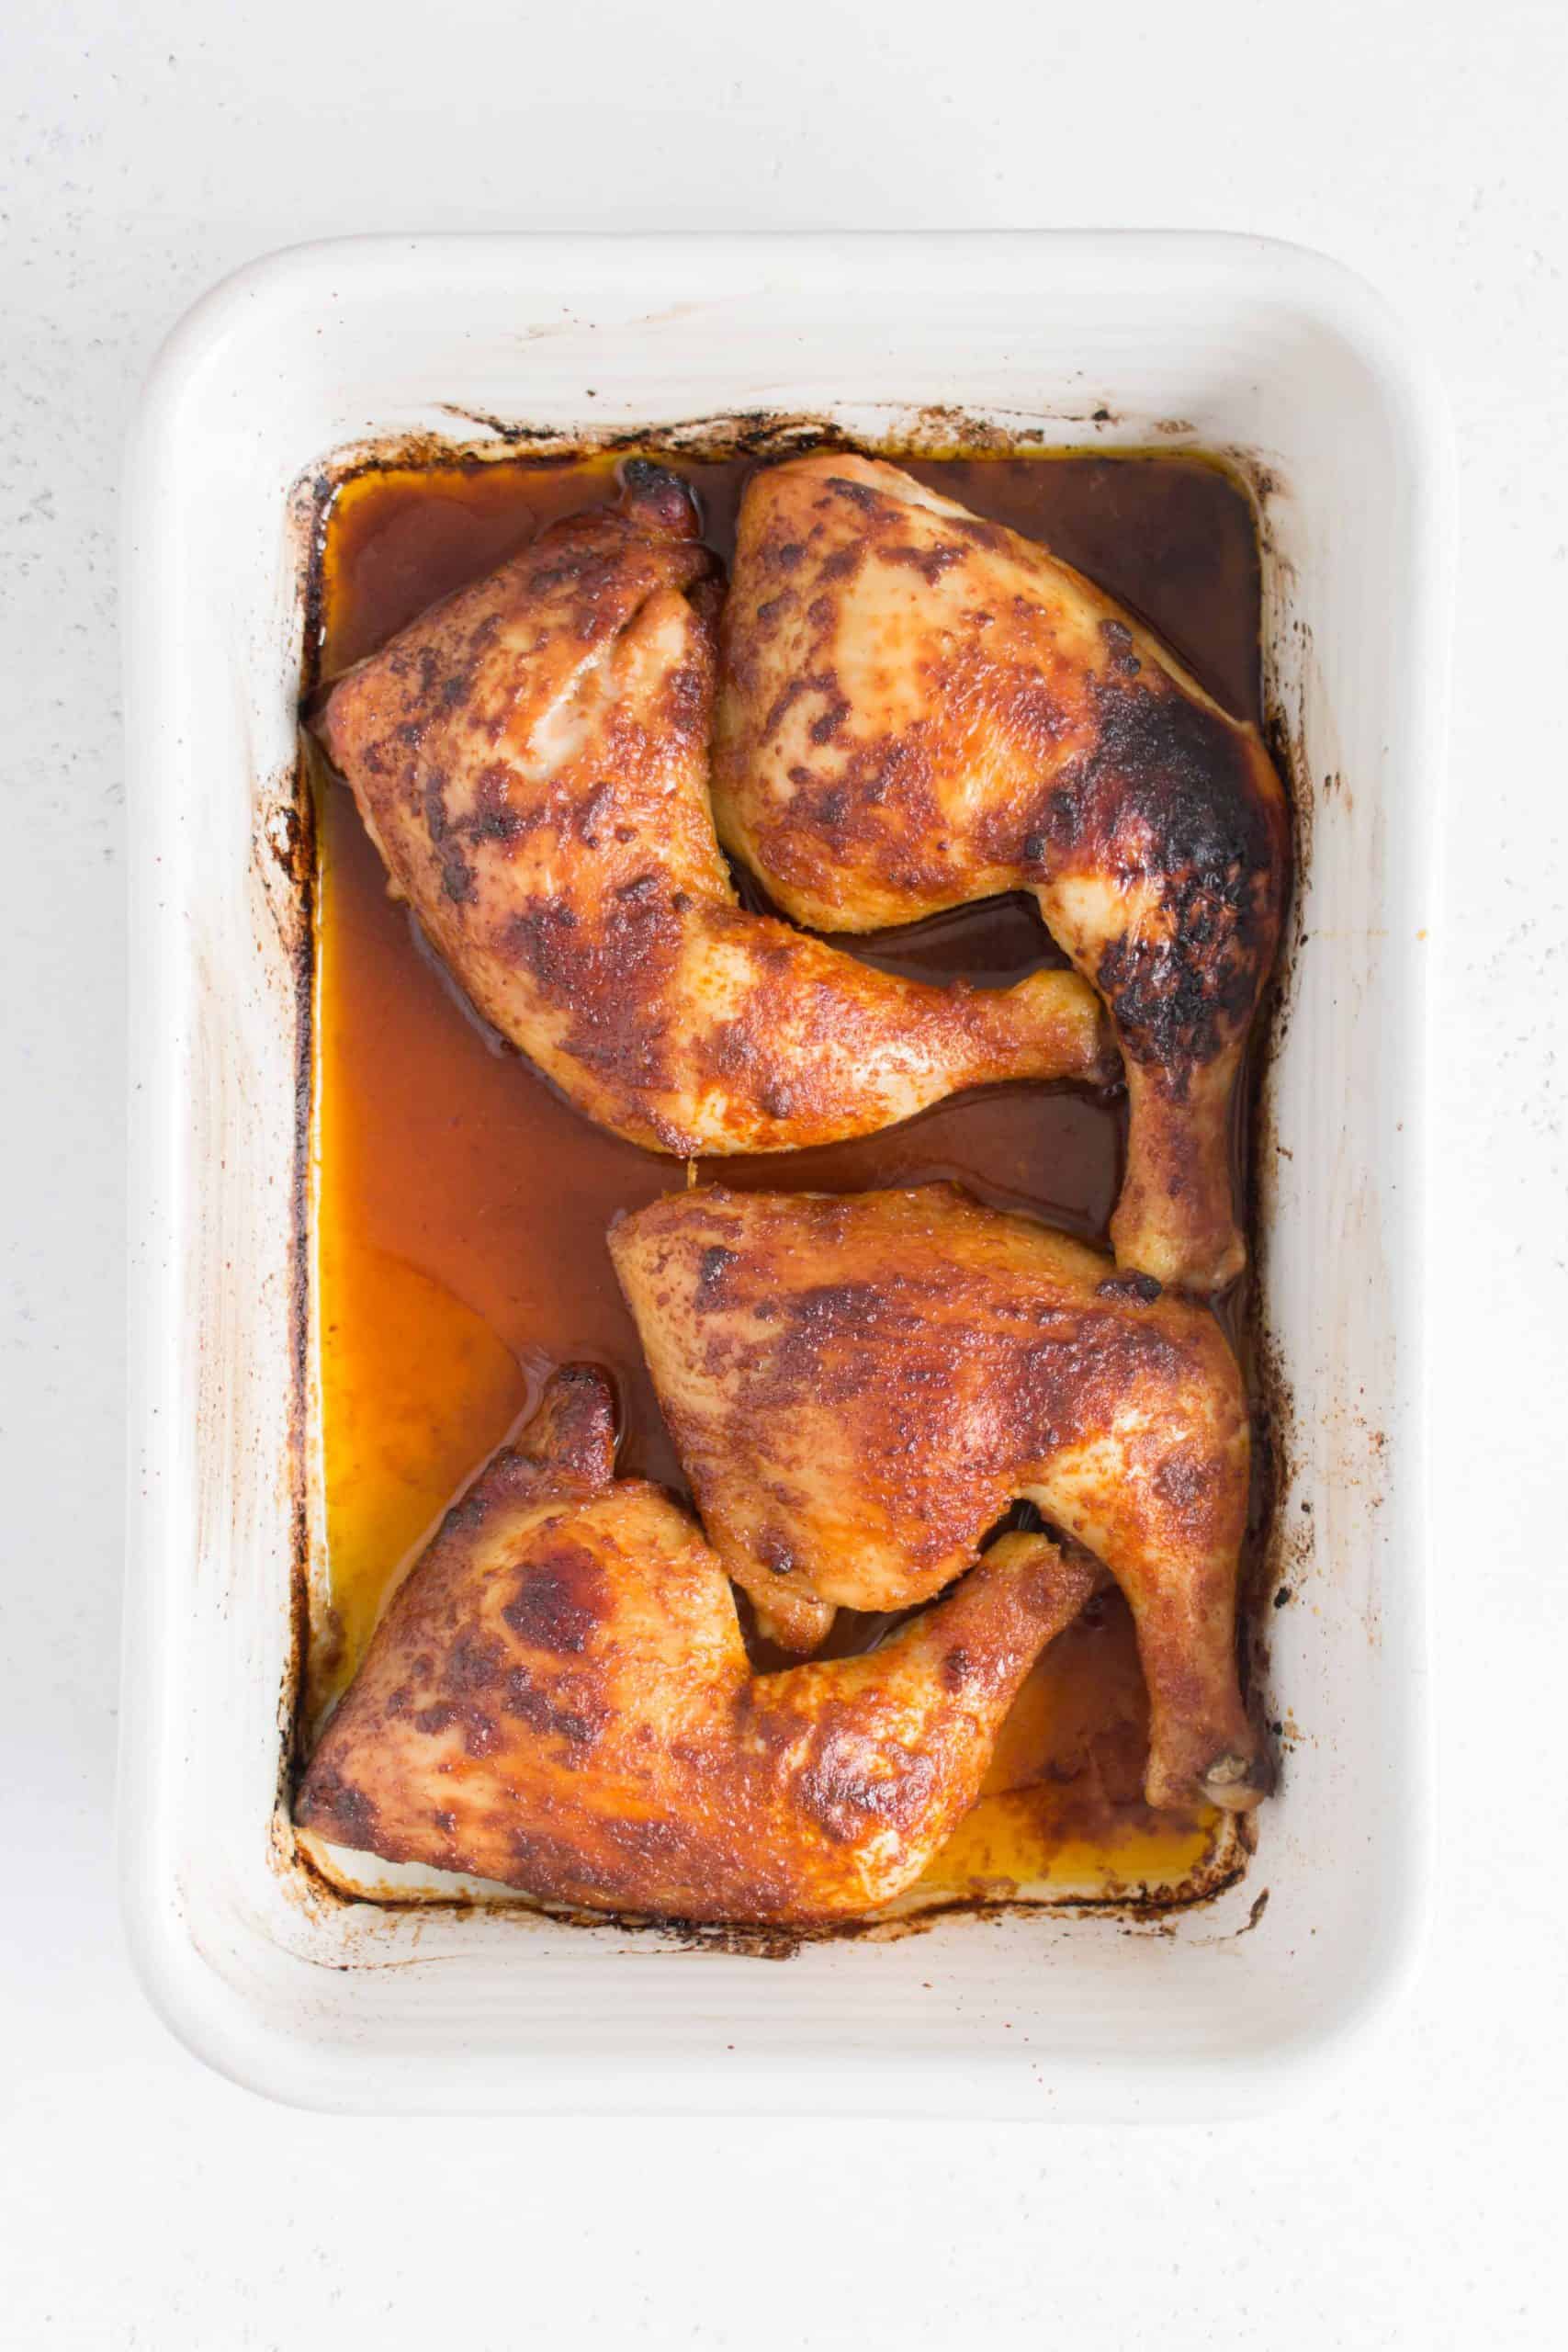 Overhead view of baked chicken quarters in a white baking pan.